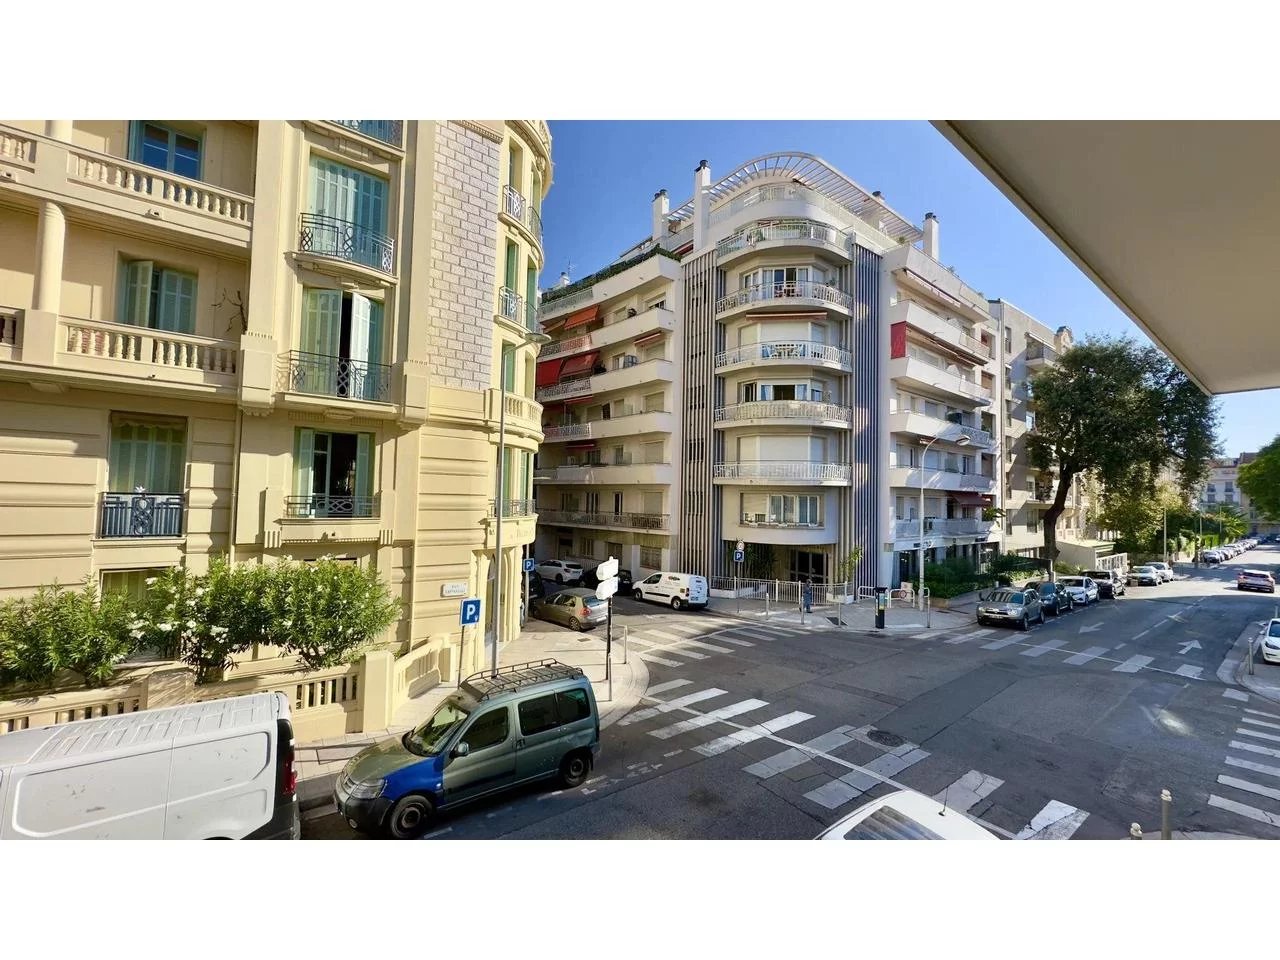 Appartement  3 Rooms 66.08m2  for sale   379 000 €